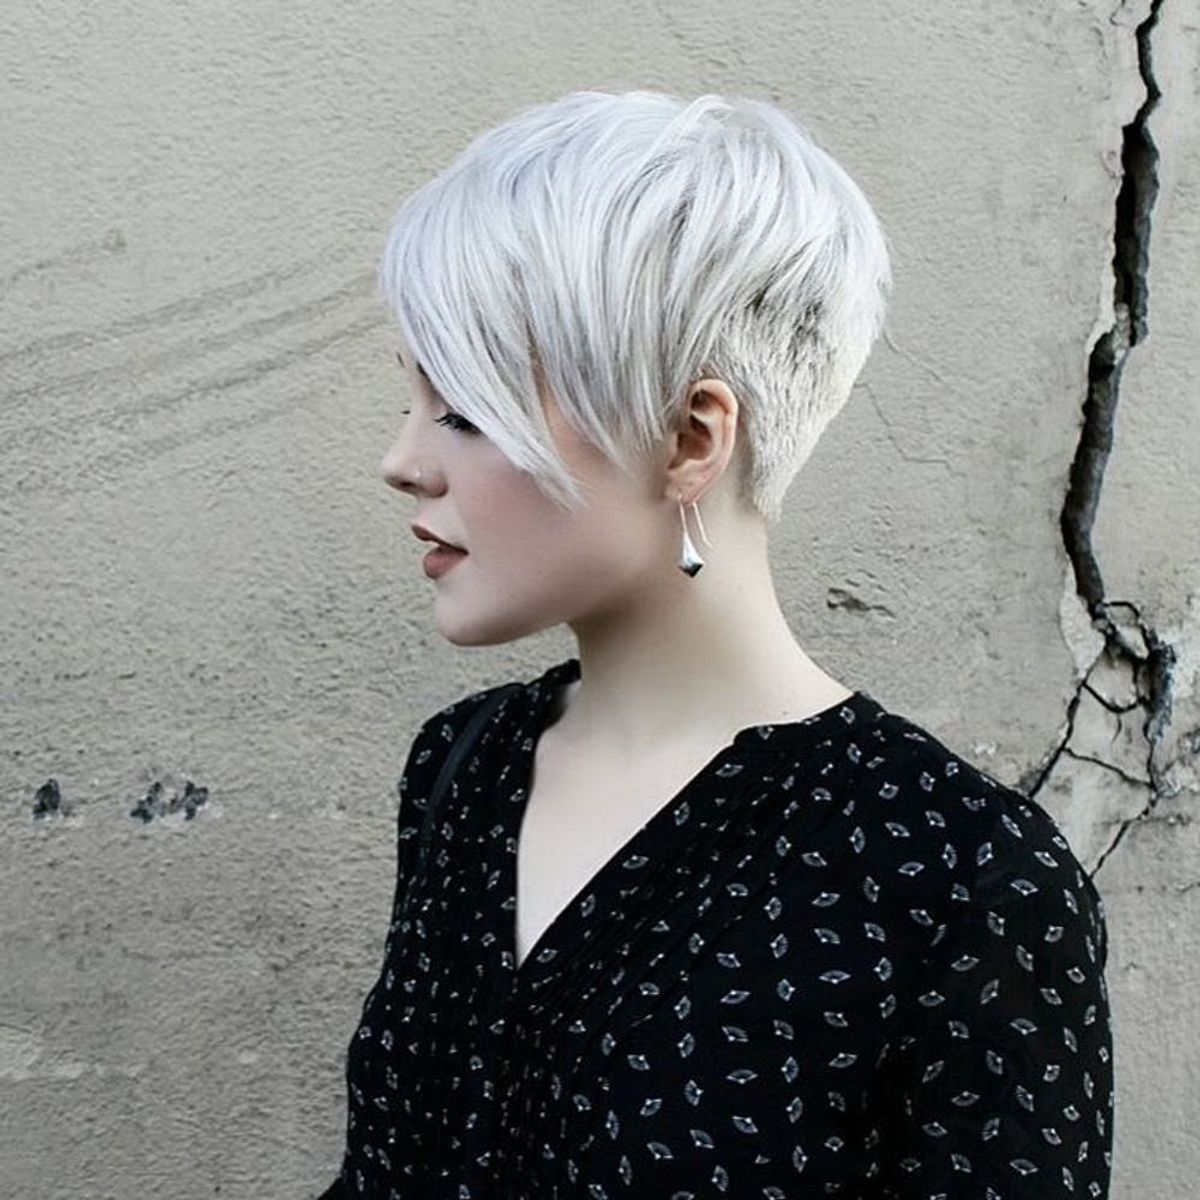 These 18 Short Summer Haircuts Will Have You Reaching for the Scissors